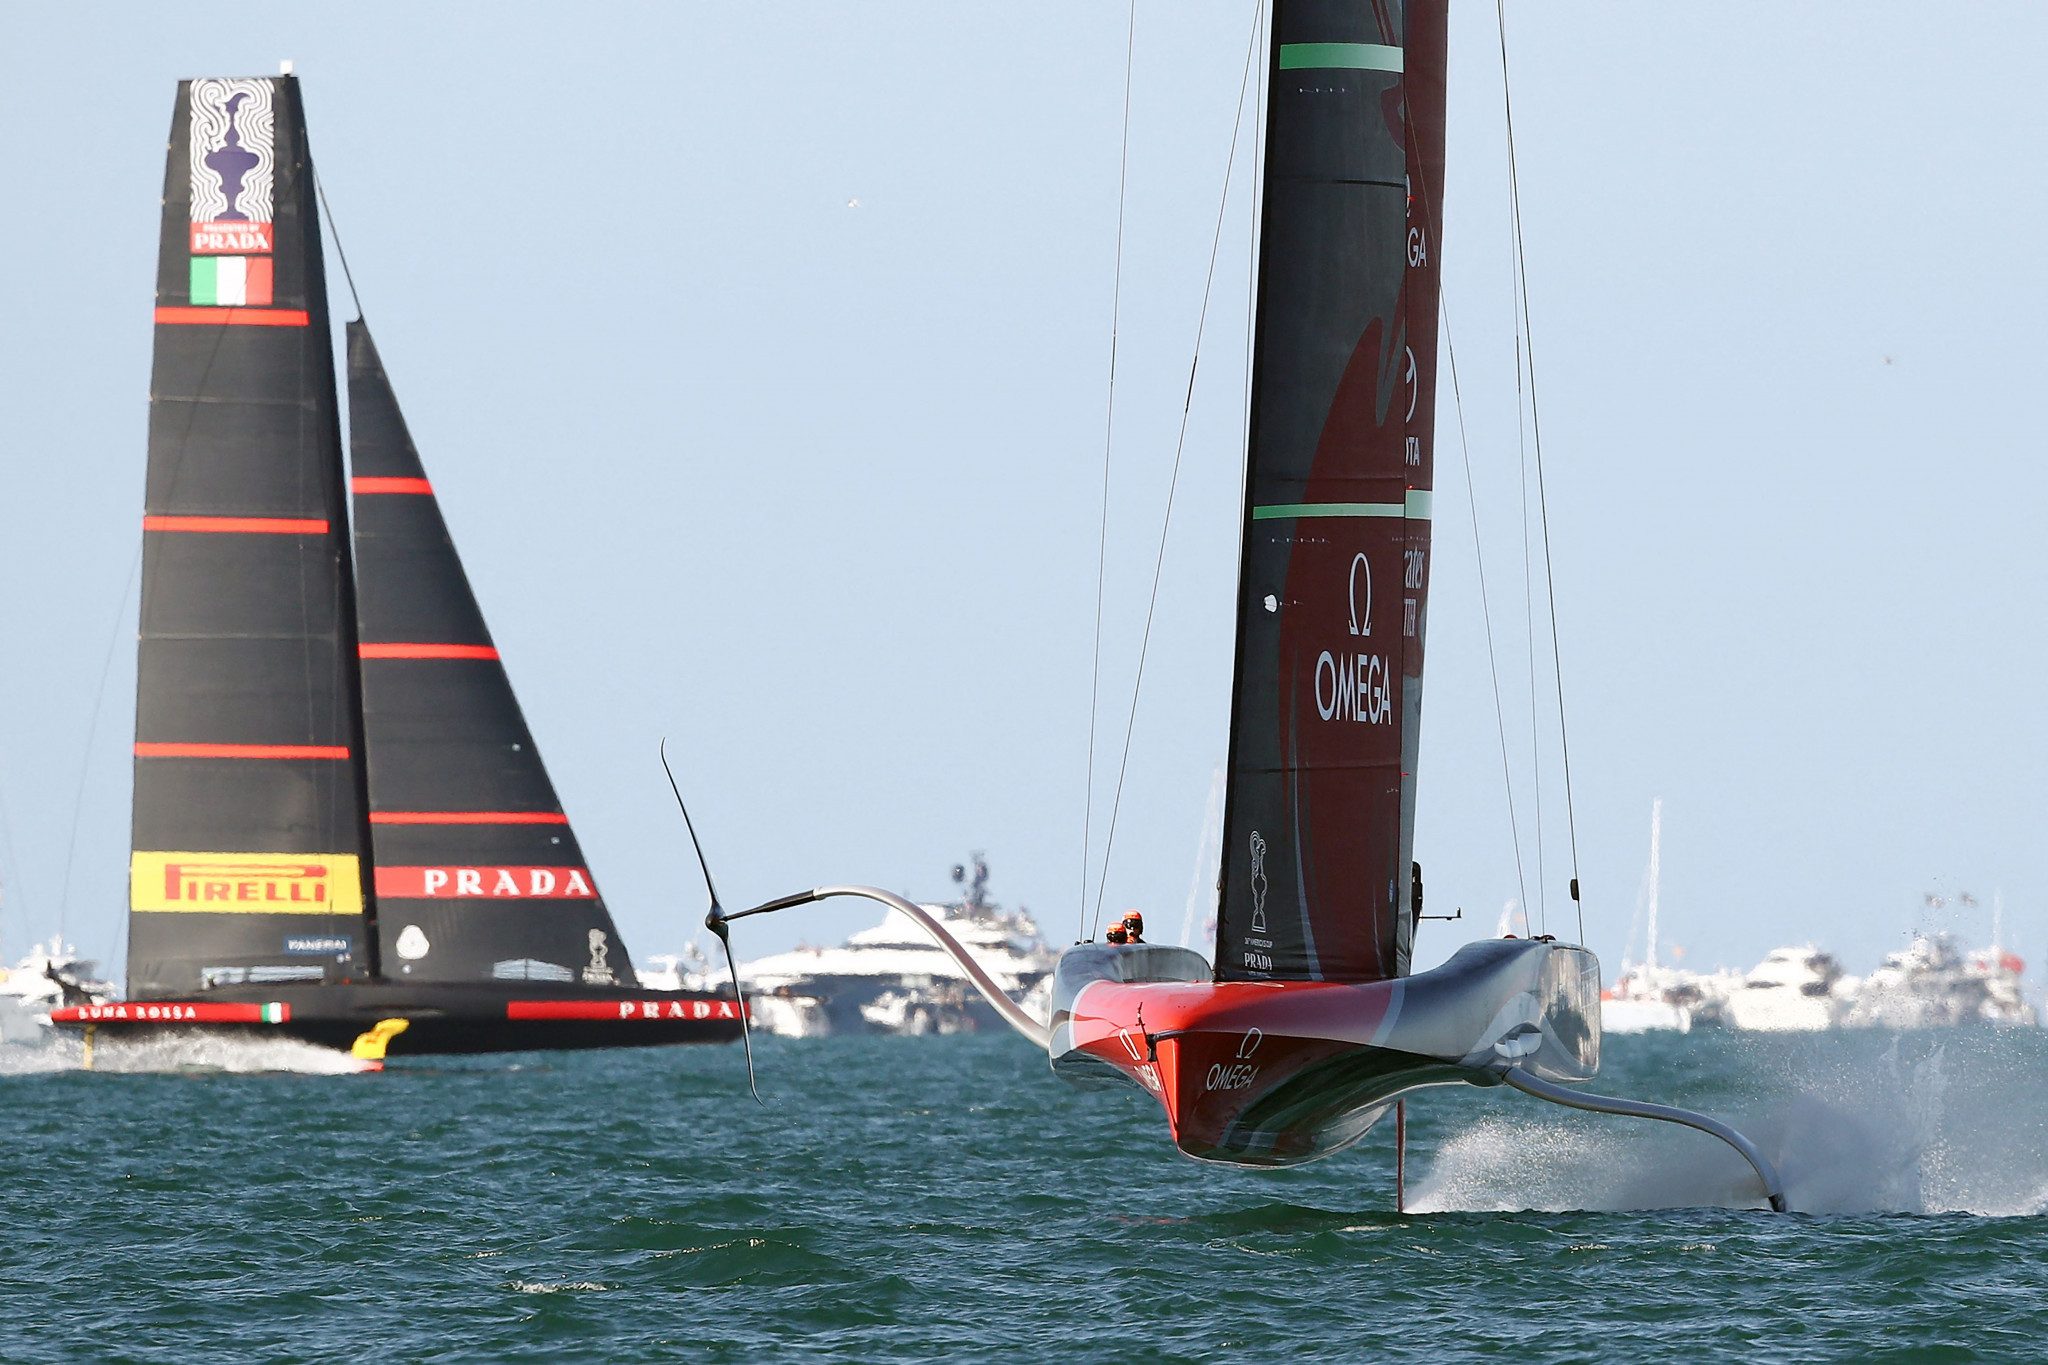 Team New Zealand and Luna Rossa remain locked at 3-3 after three days of racing in Auckland ©Getty Images